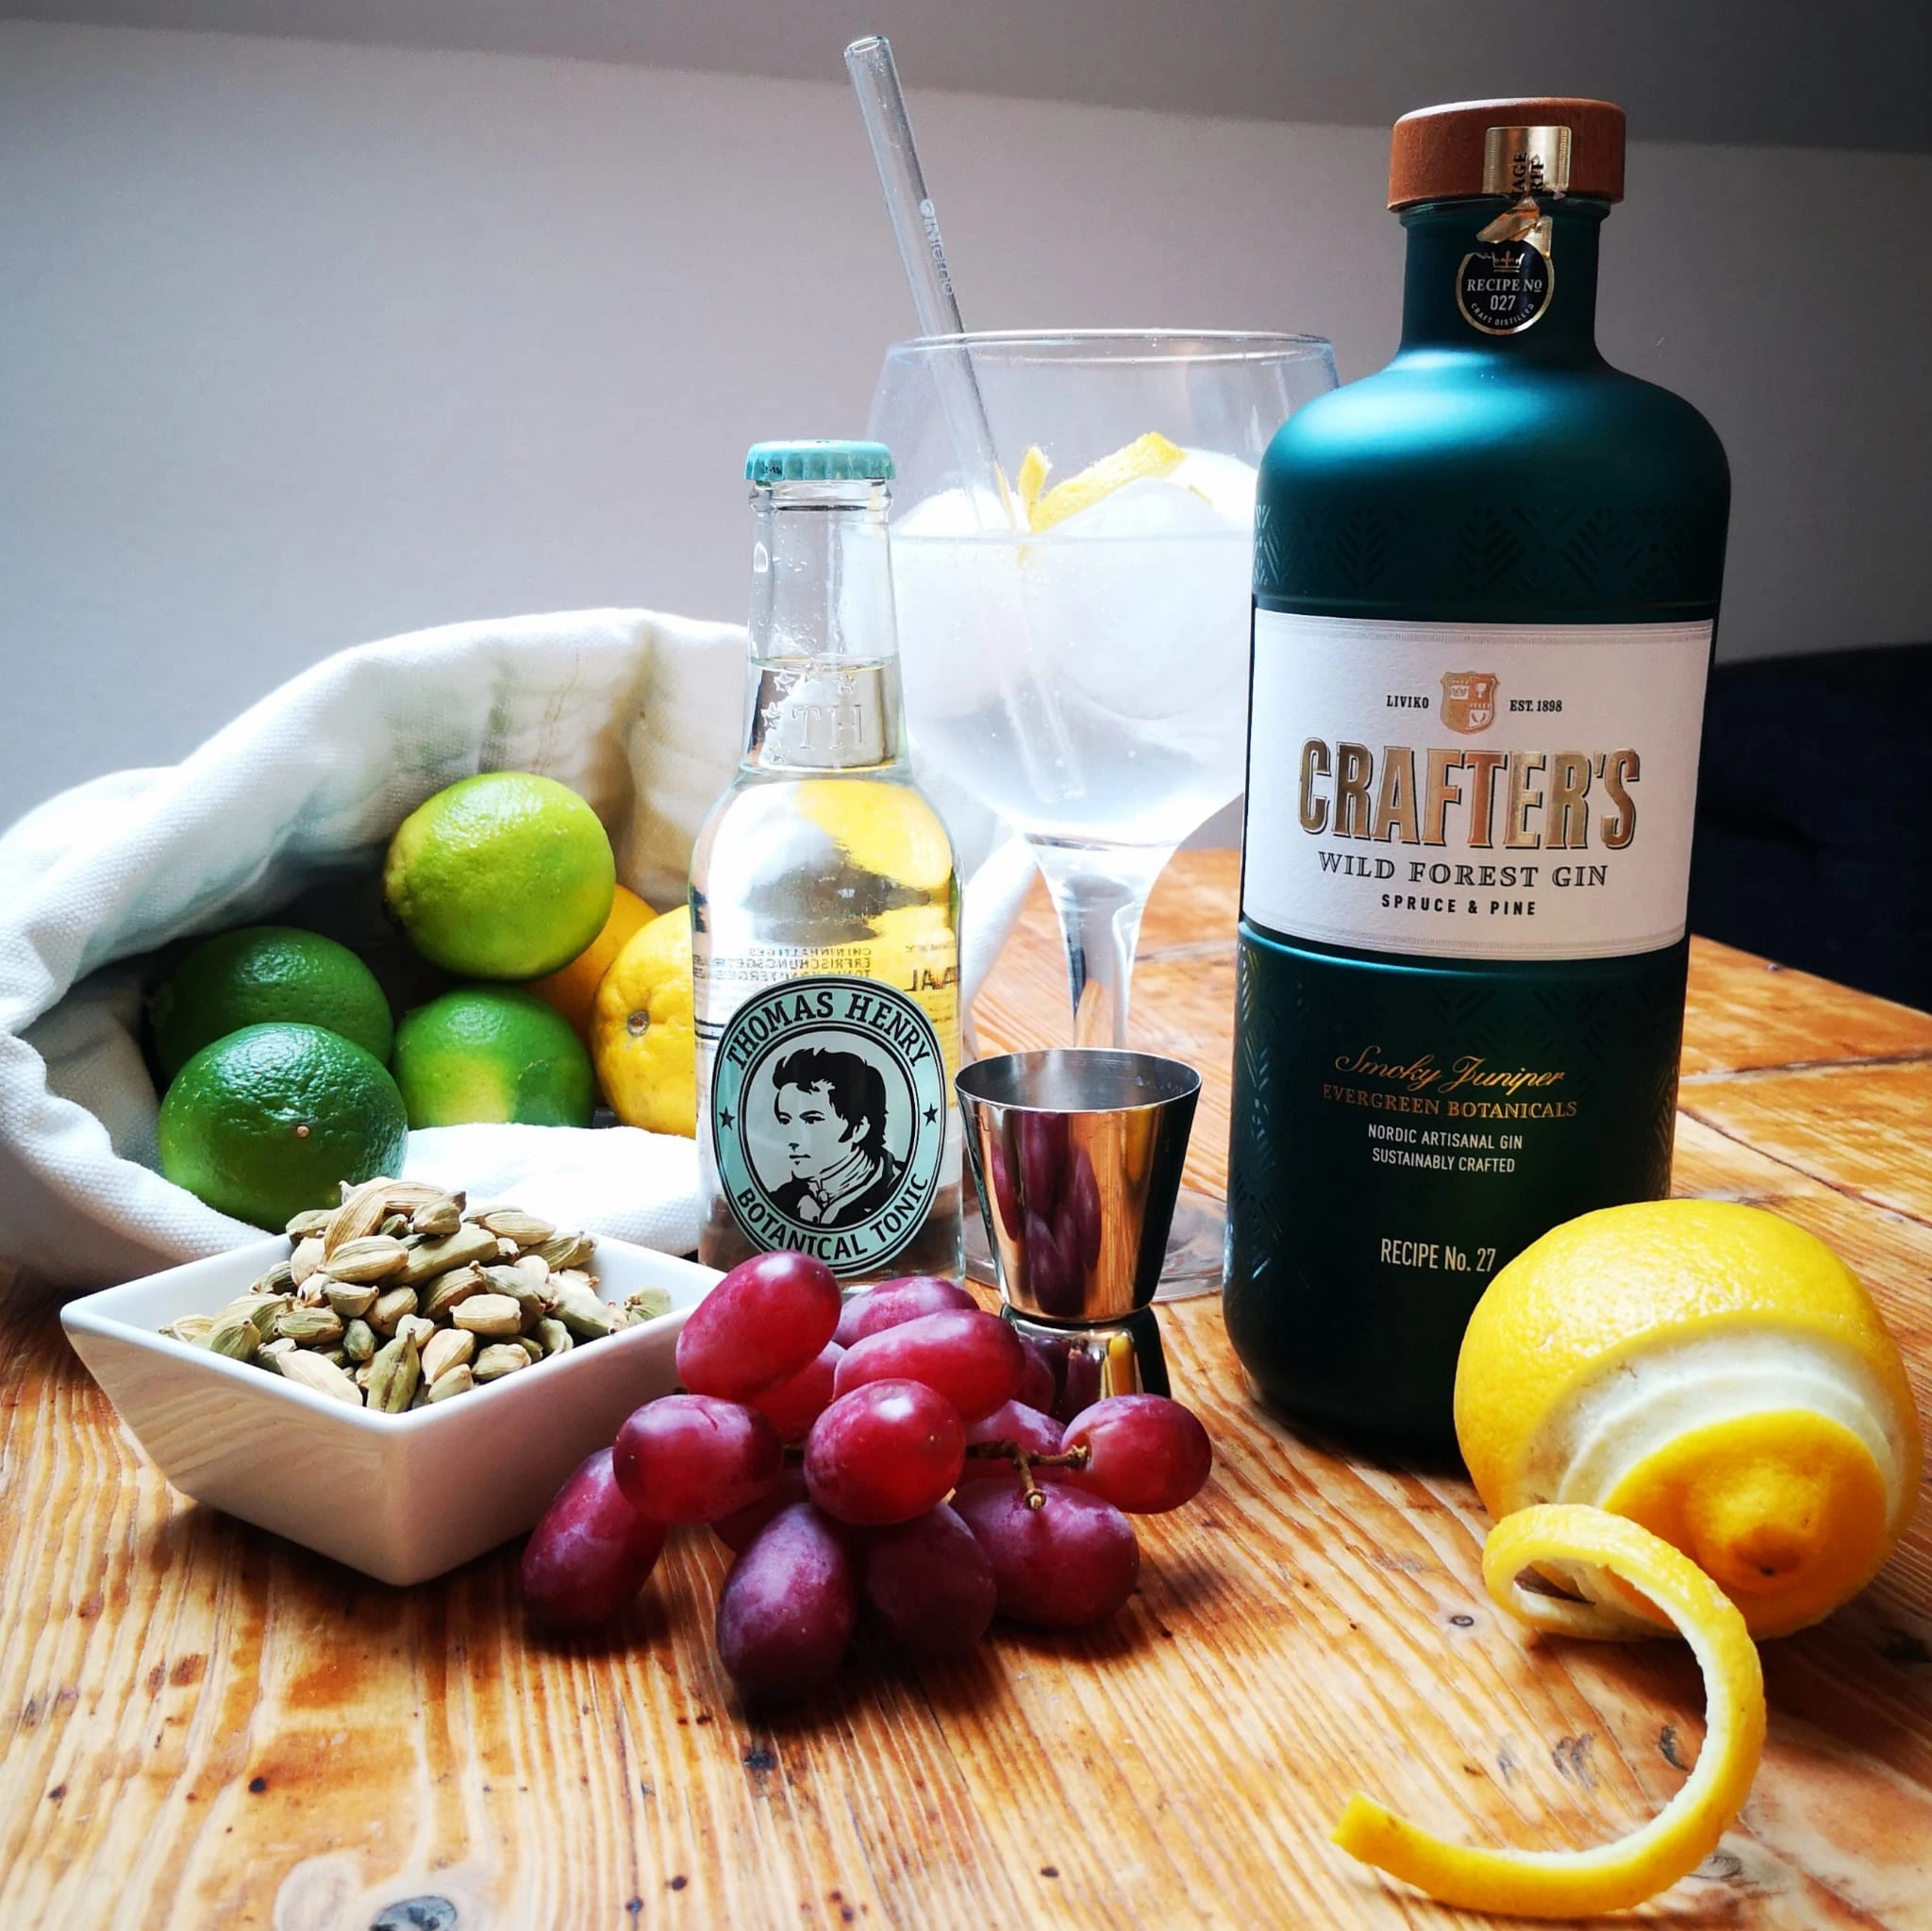 CRAFTERS Wild Forest Gin